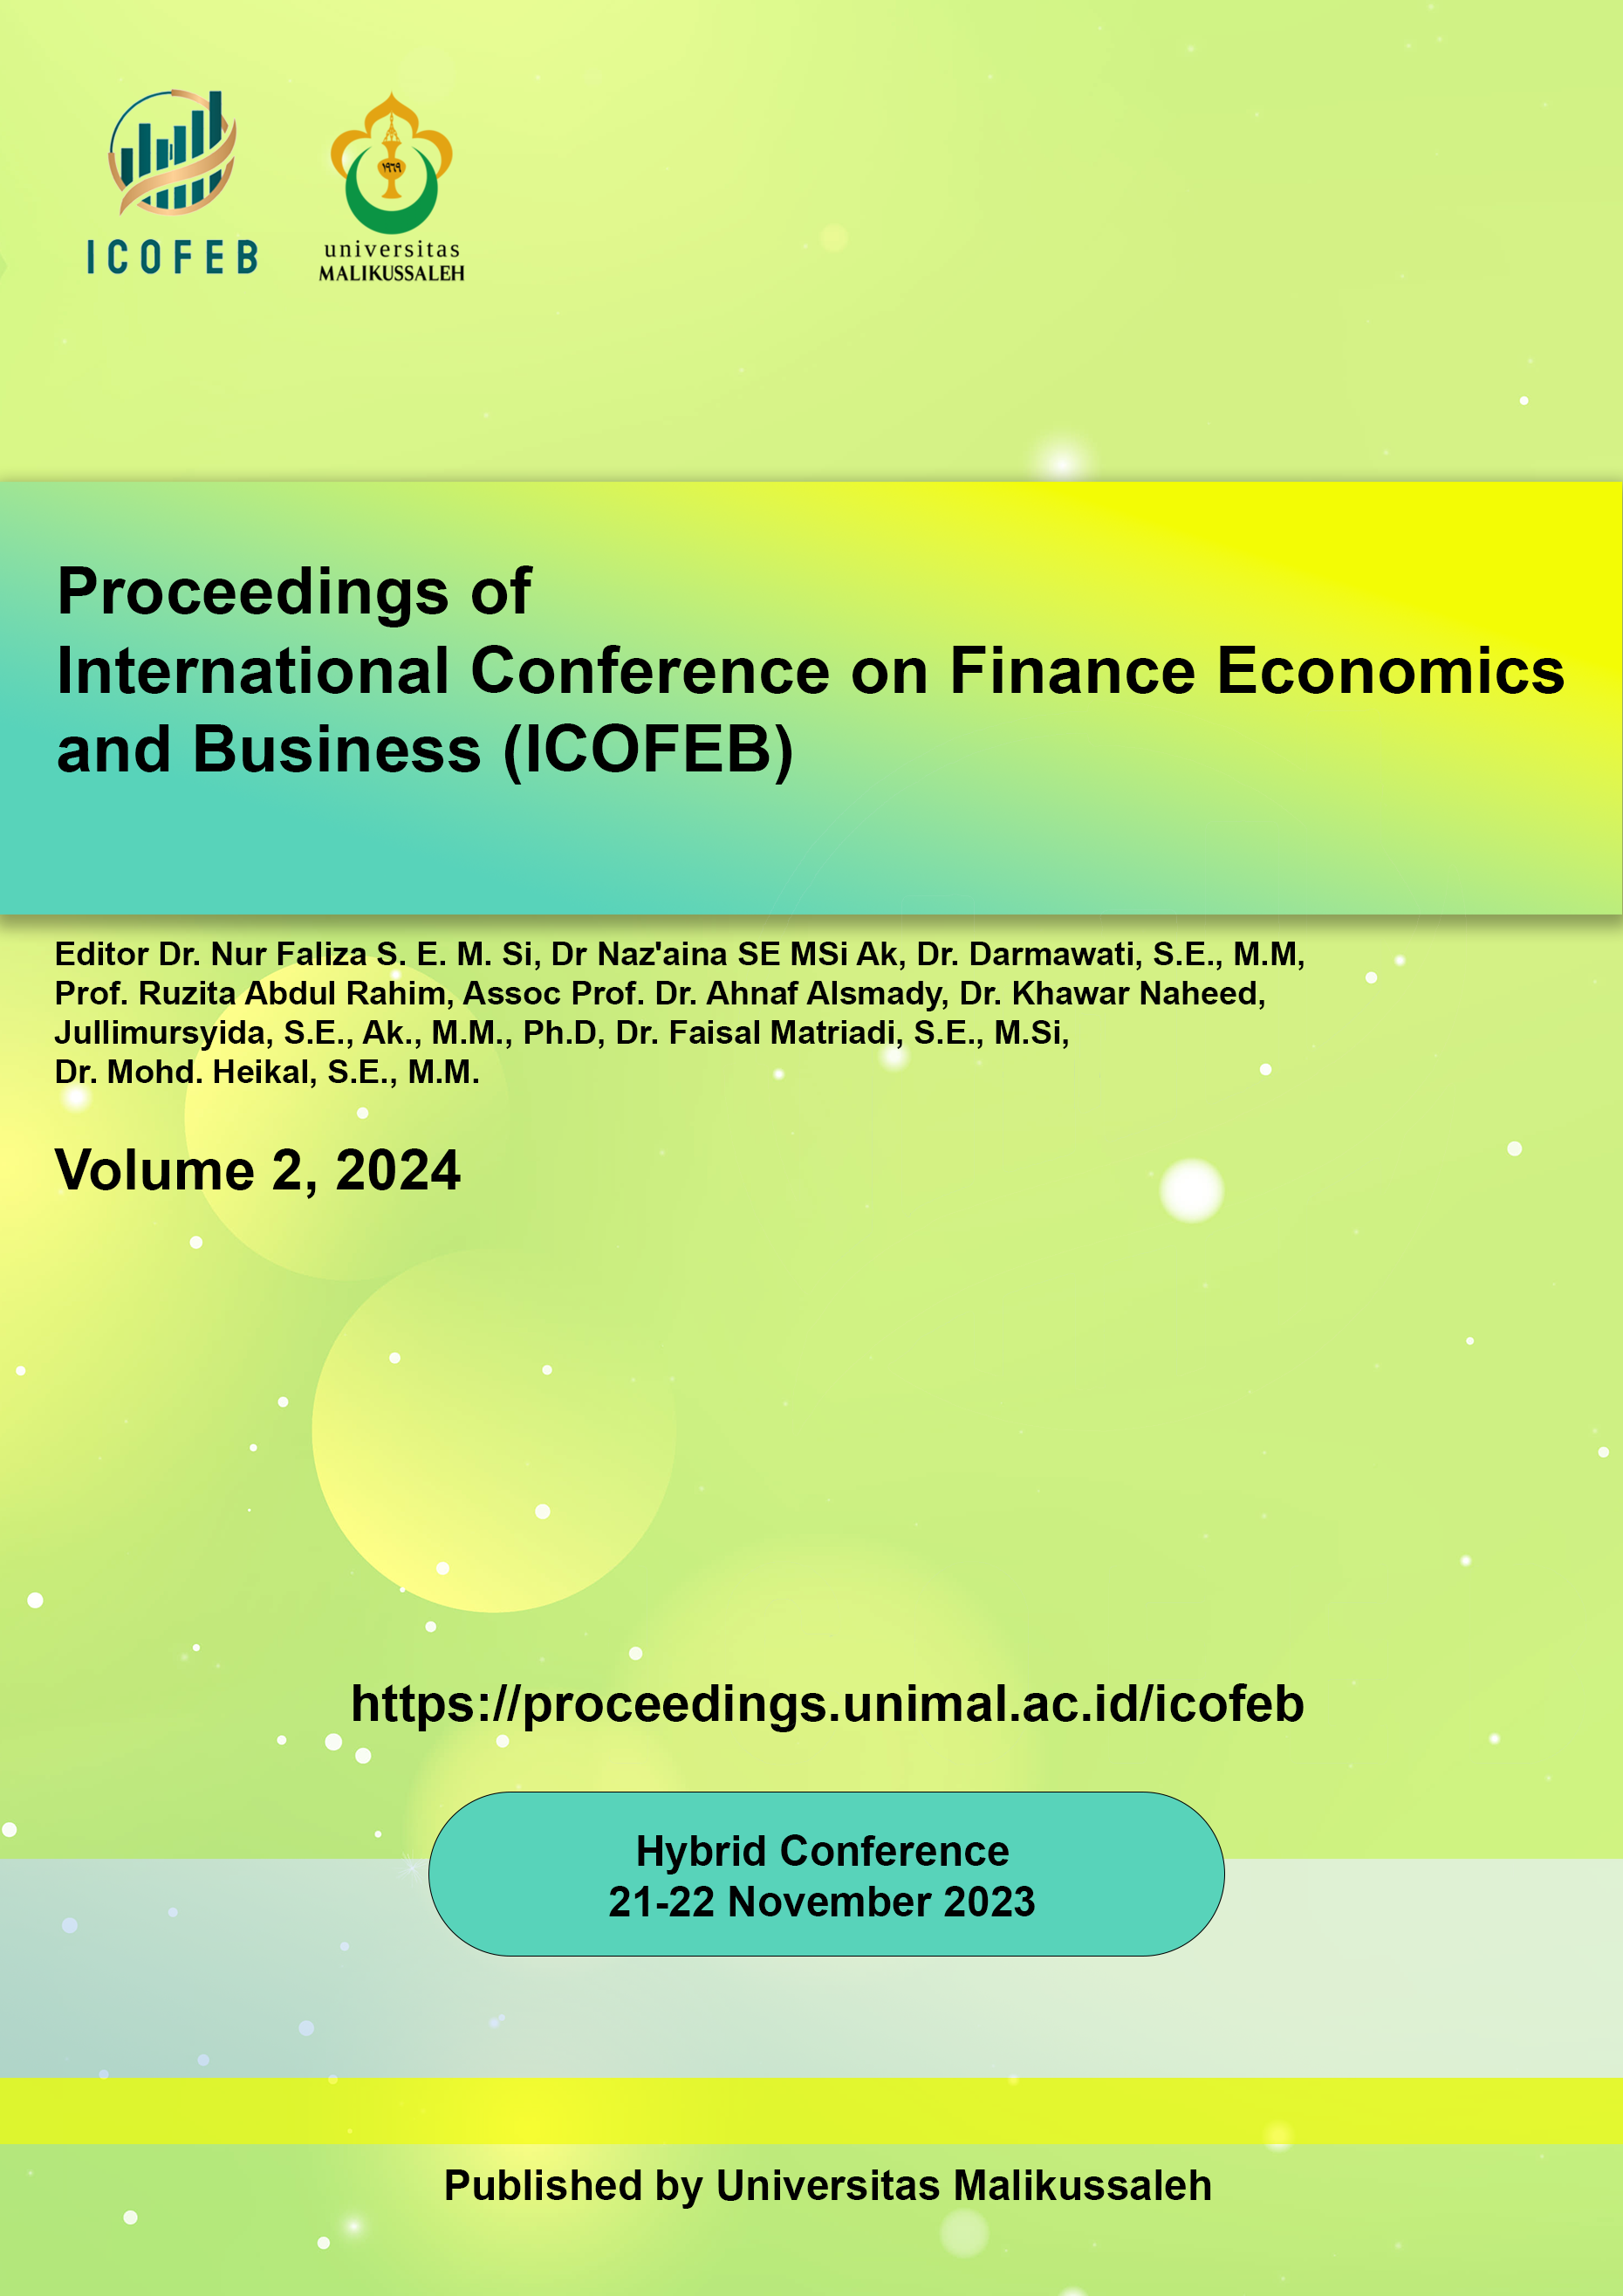 Vol. 2 (2024) International Conference on Finance Economics and